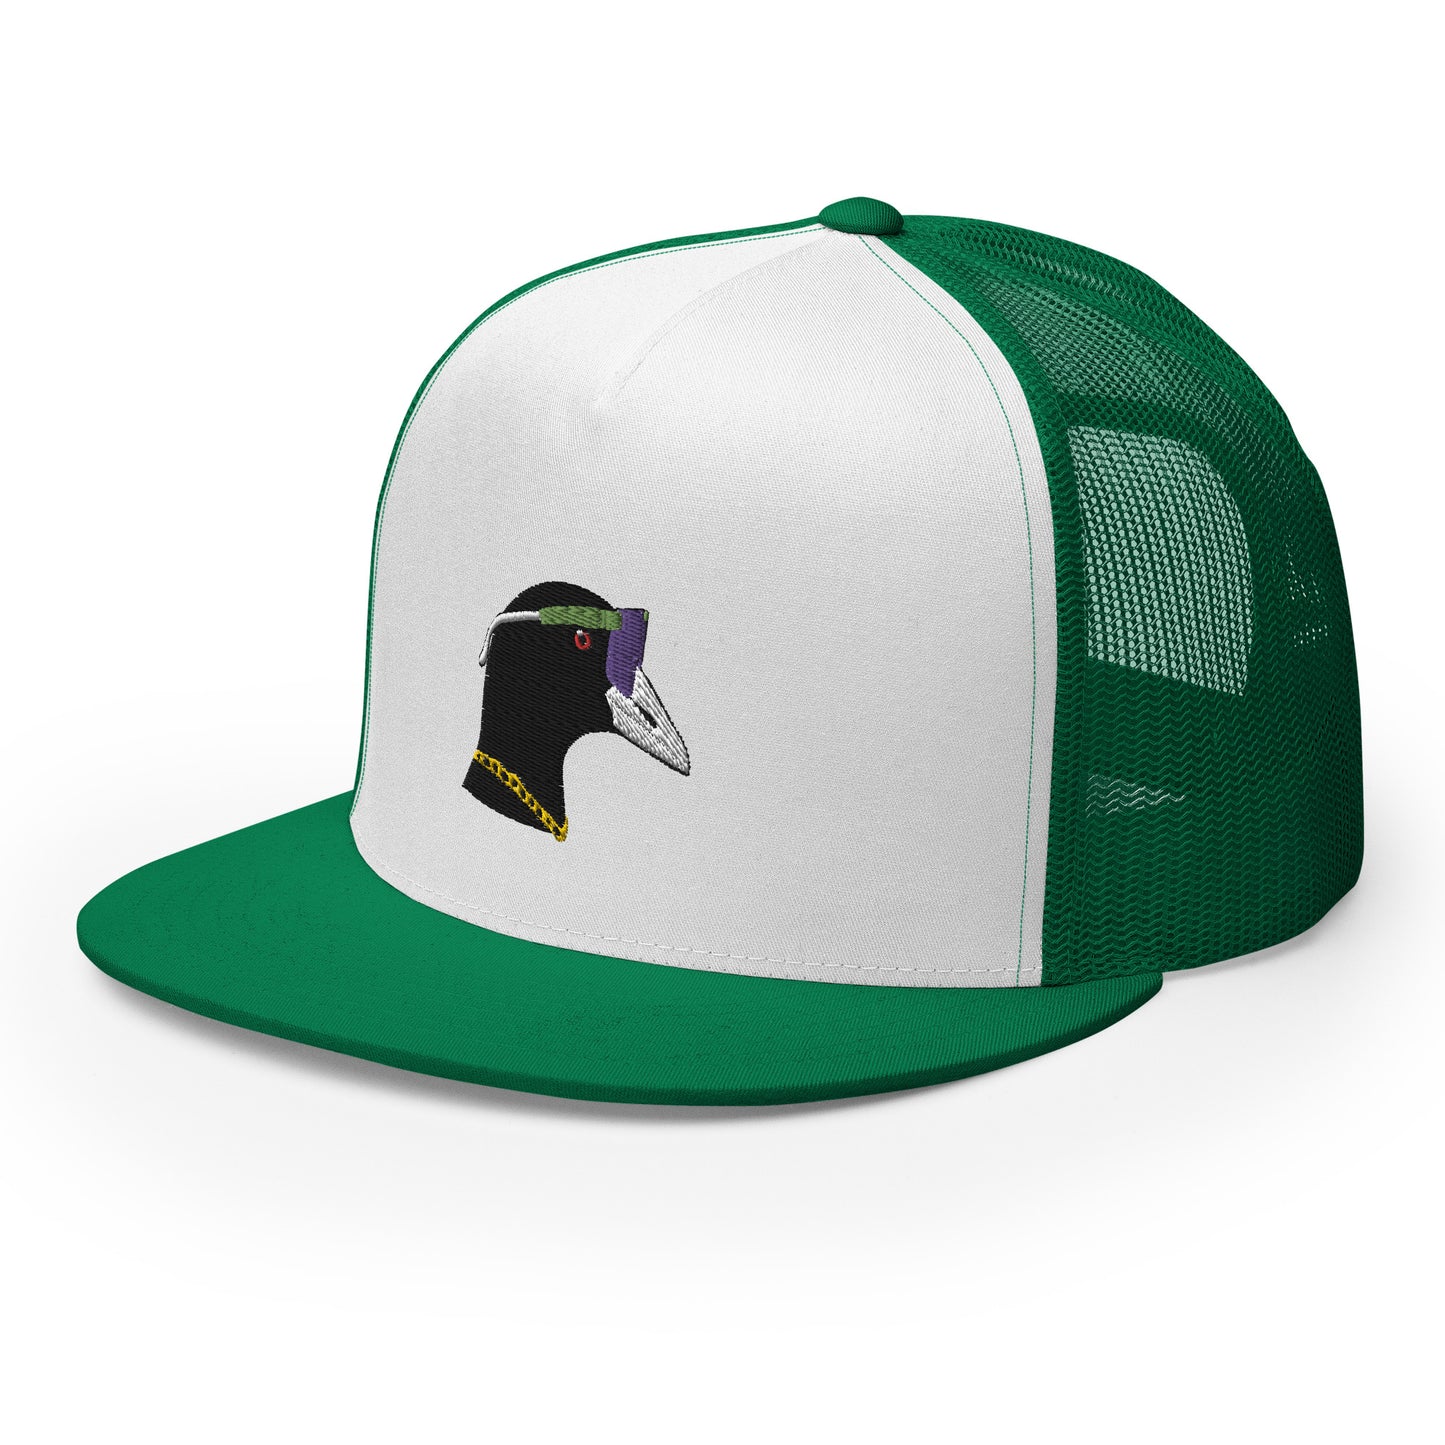 Coot Smacka Flat Bill (4 Colors Available)